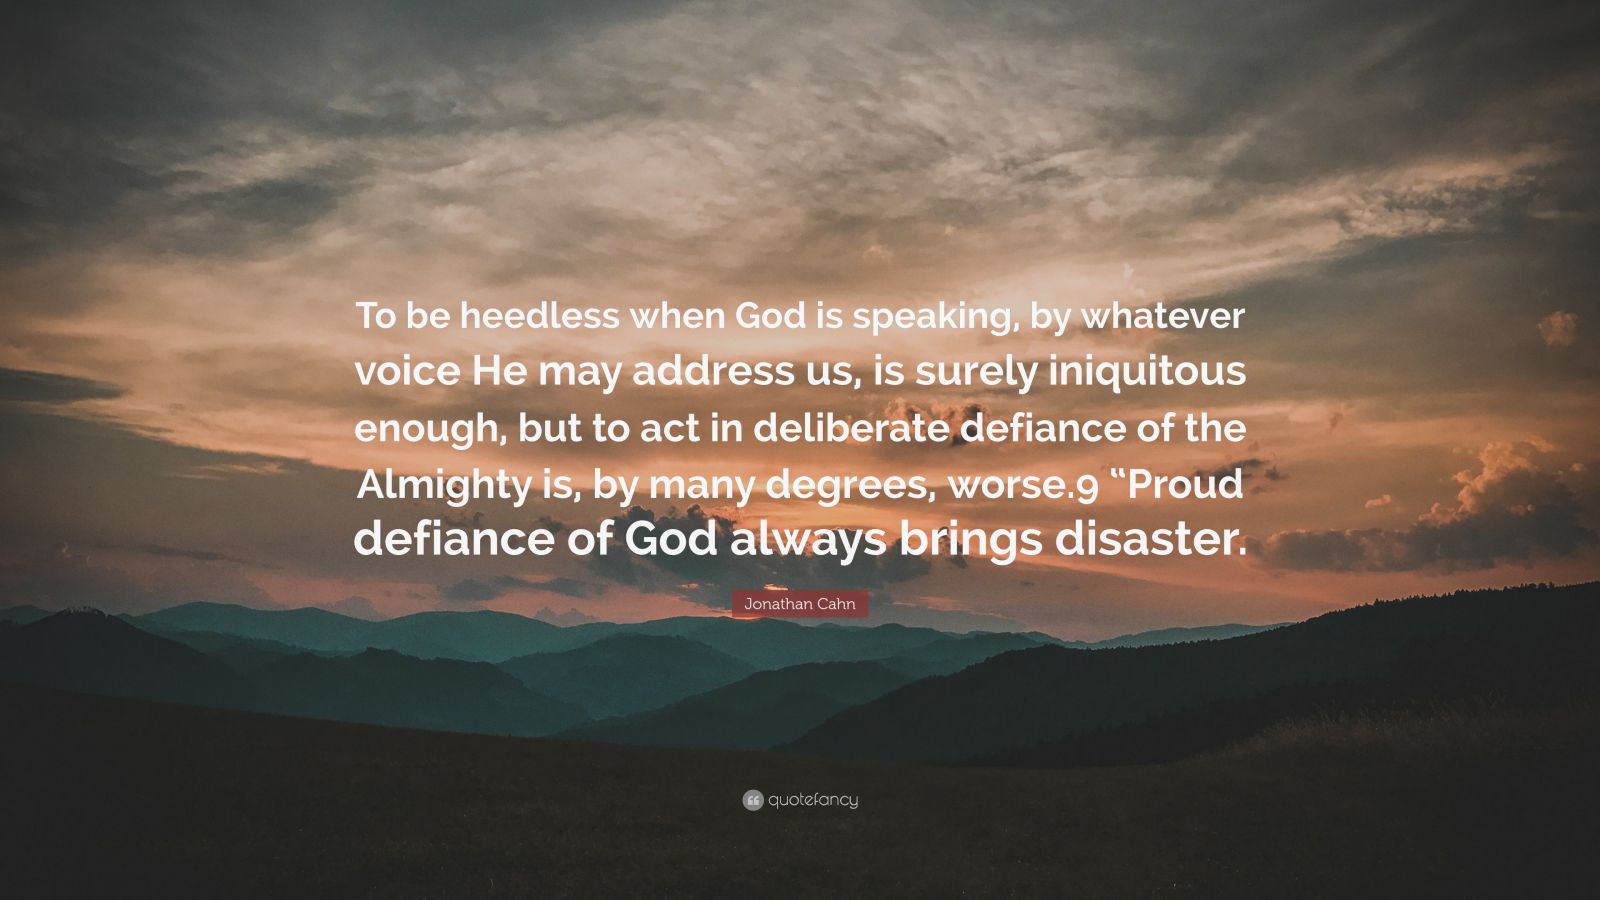 Jonathan Cahn Quote “To be heedless when God is speaking, by whatever